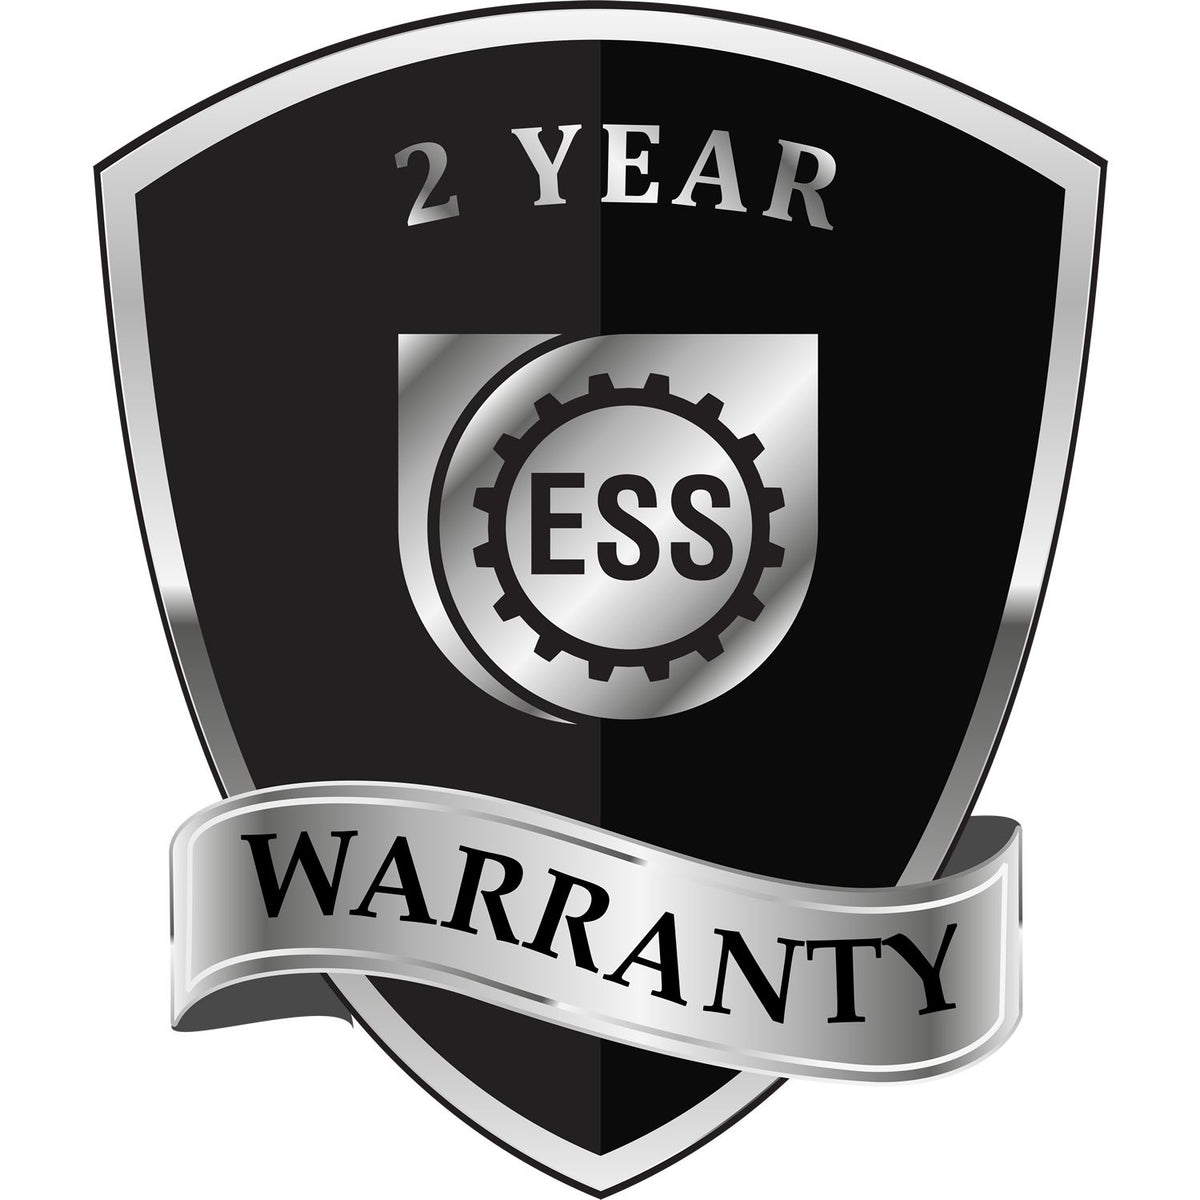 A badge or emblem showing a warranty icon for the Handheld Missouri Land Surveyor Seal